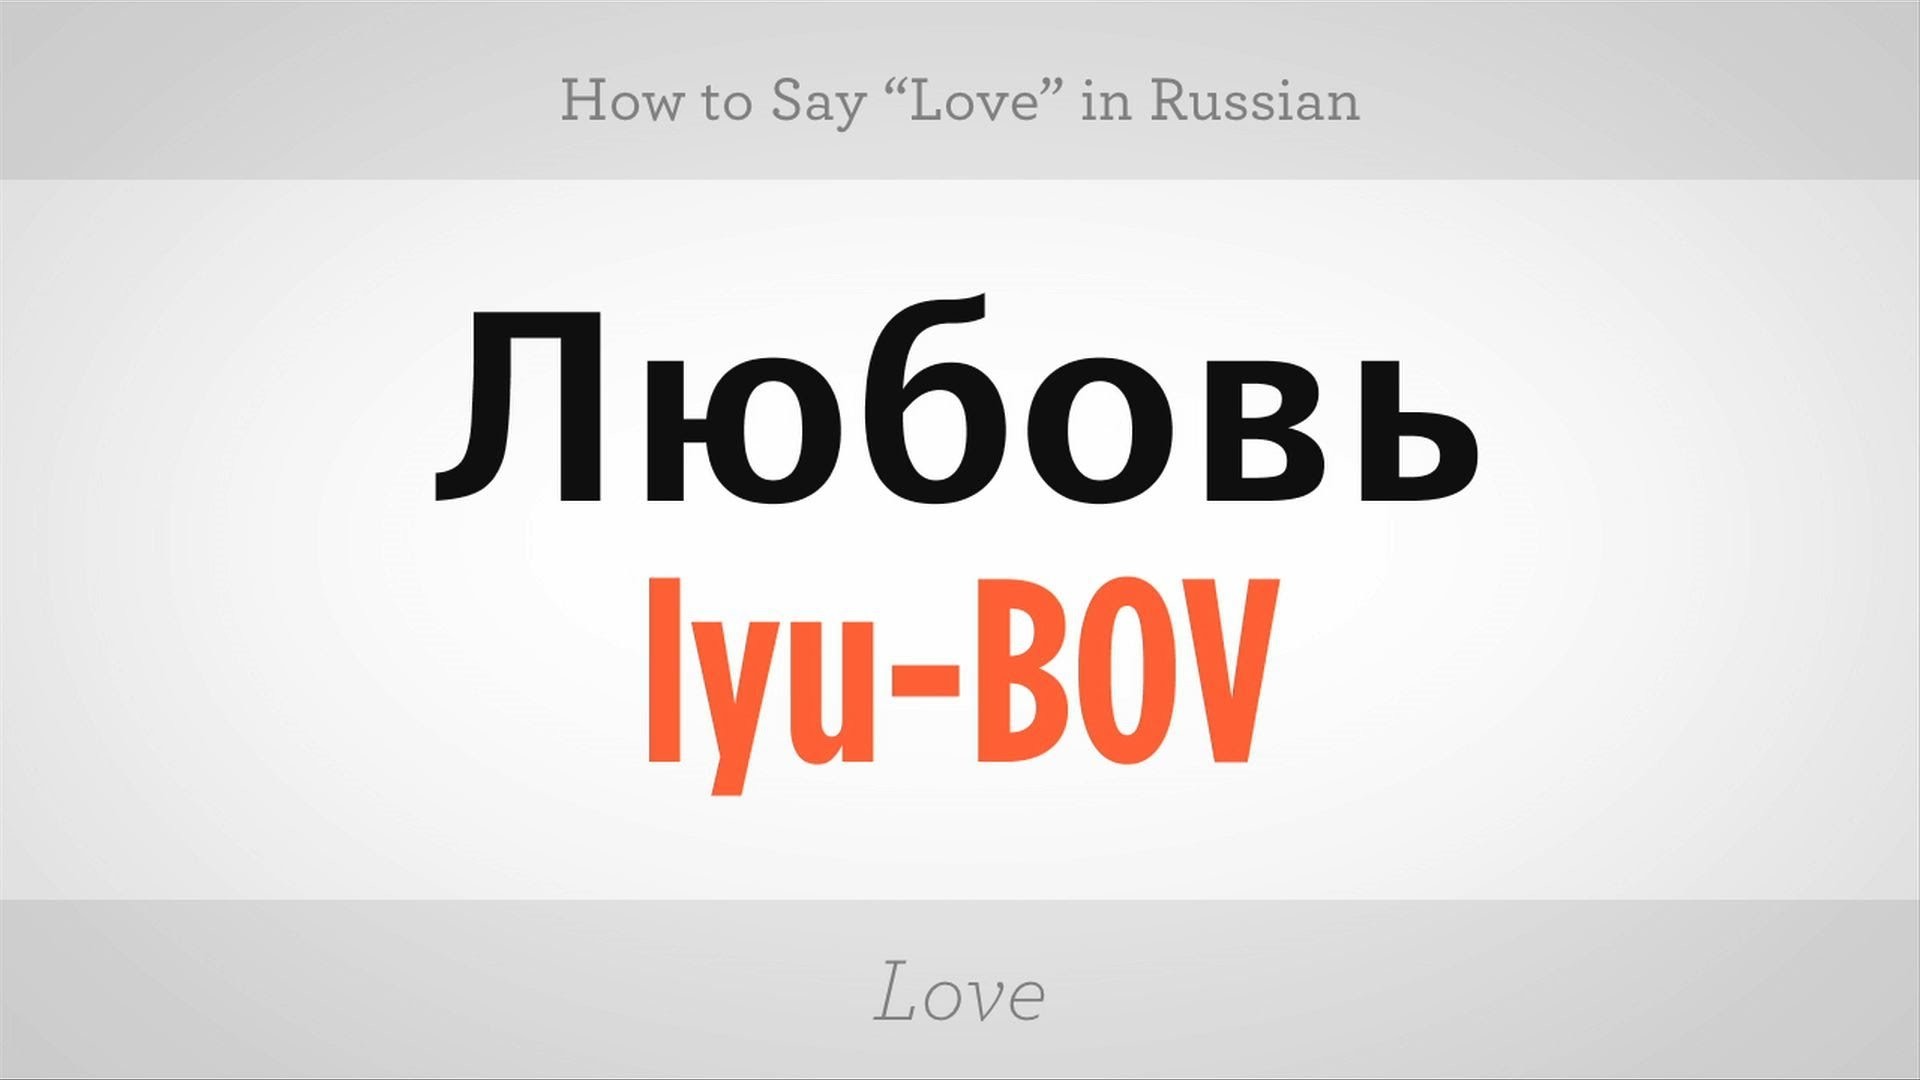 843 русский язык. I Love you in Russian. How to say i Love you in Russian. Русский Russian язык. Learn Russian language.